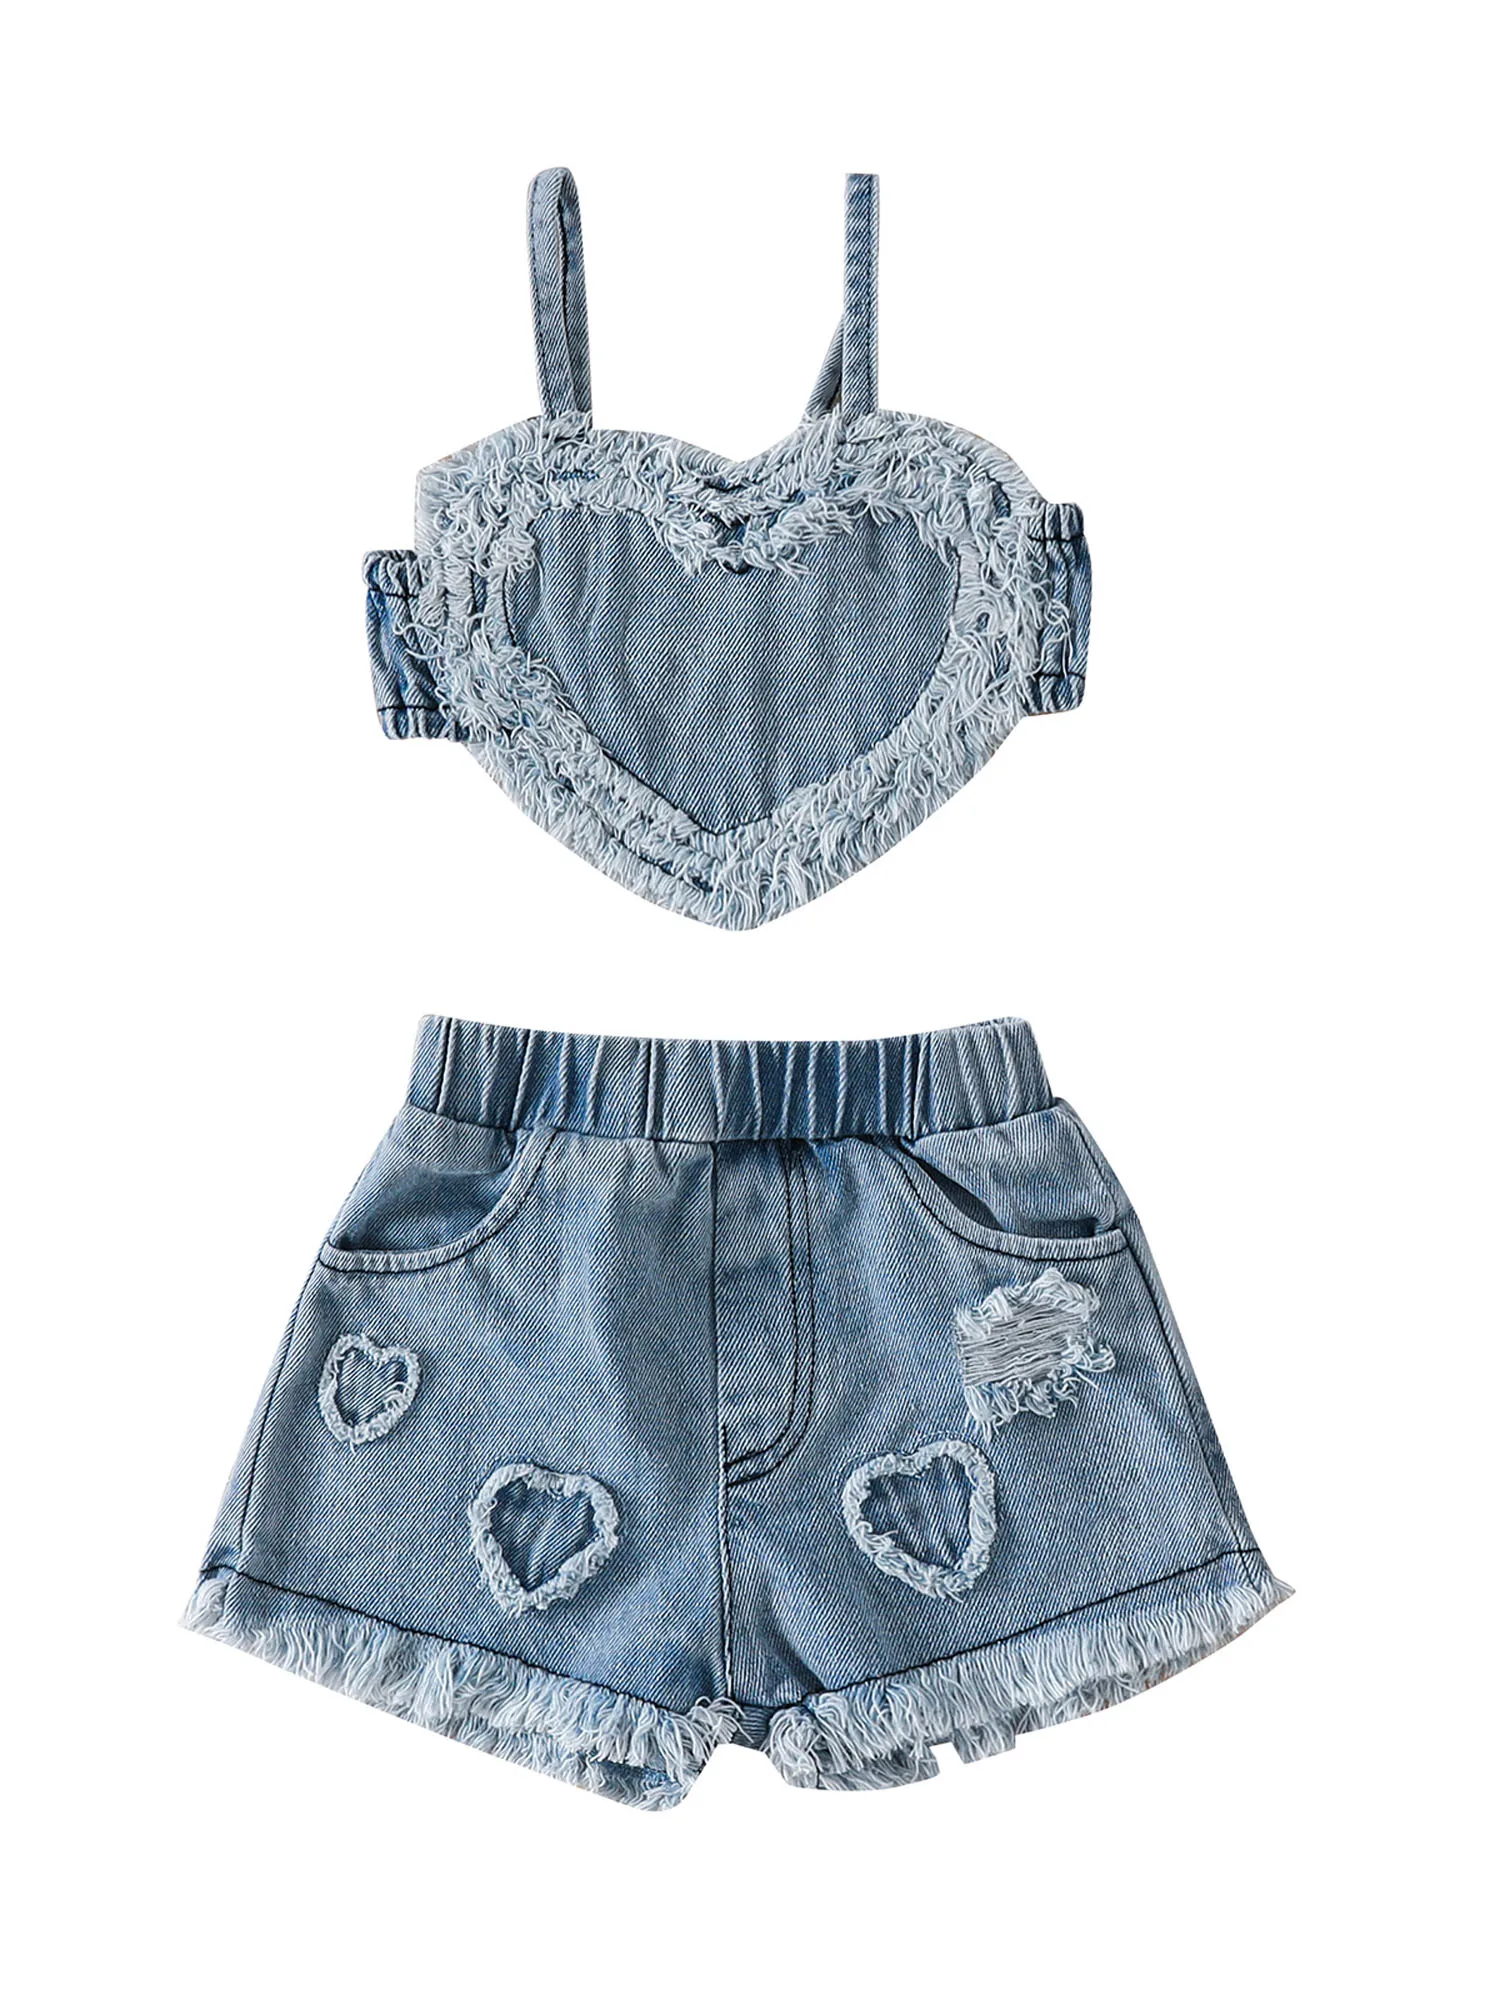 

FOCUSNORM 0-24M 2pcs Baby Girls Lovely Clothes Sets Denim Sleeveless Heart Camisole Vest Elastic Ripped Shorts Summer Clothing